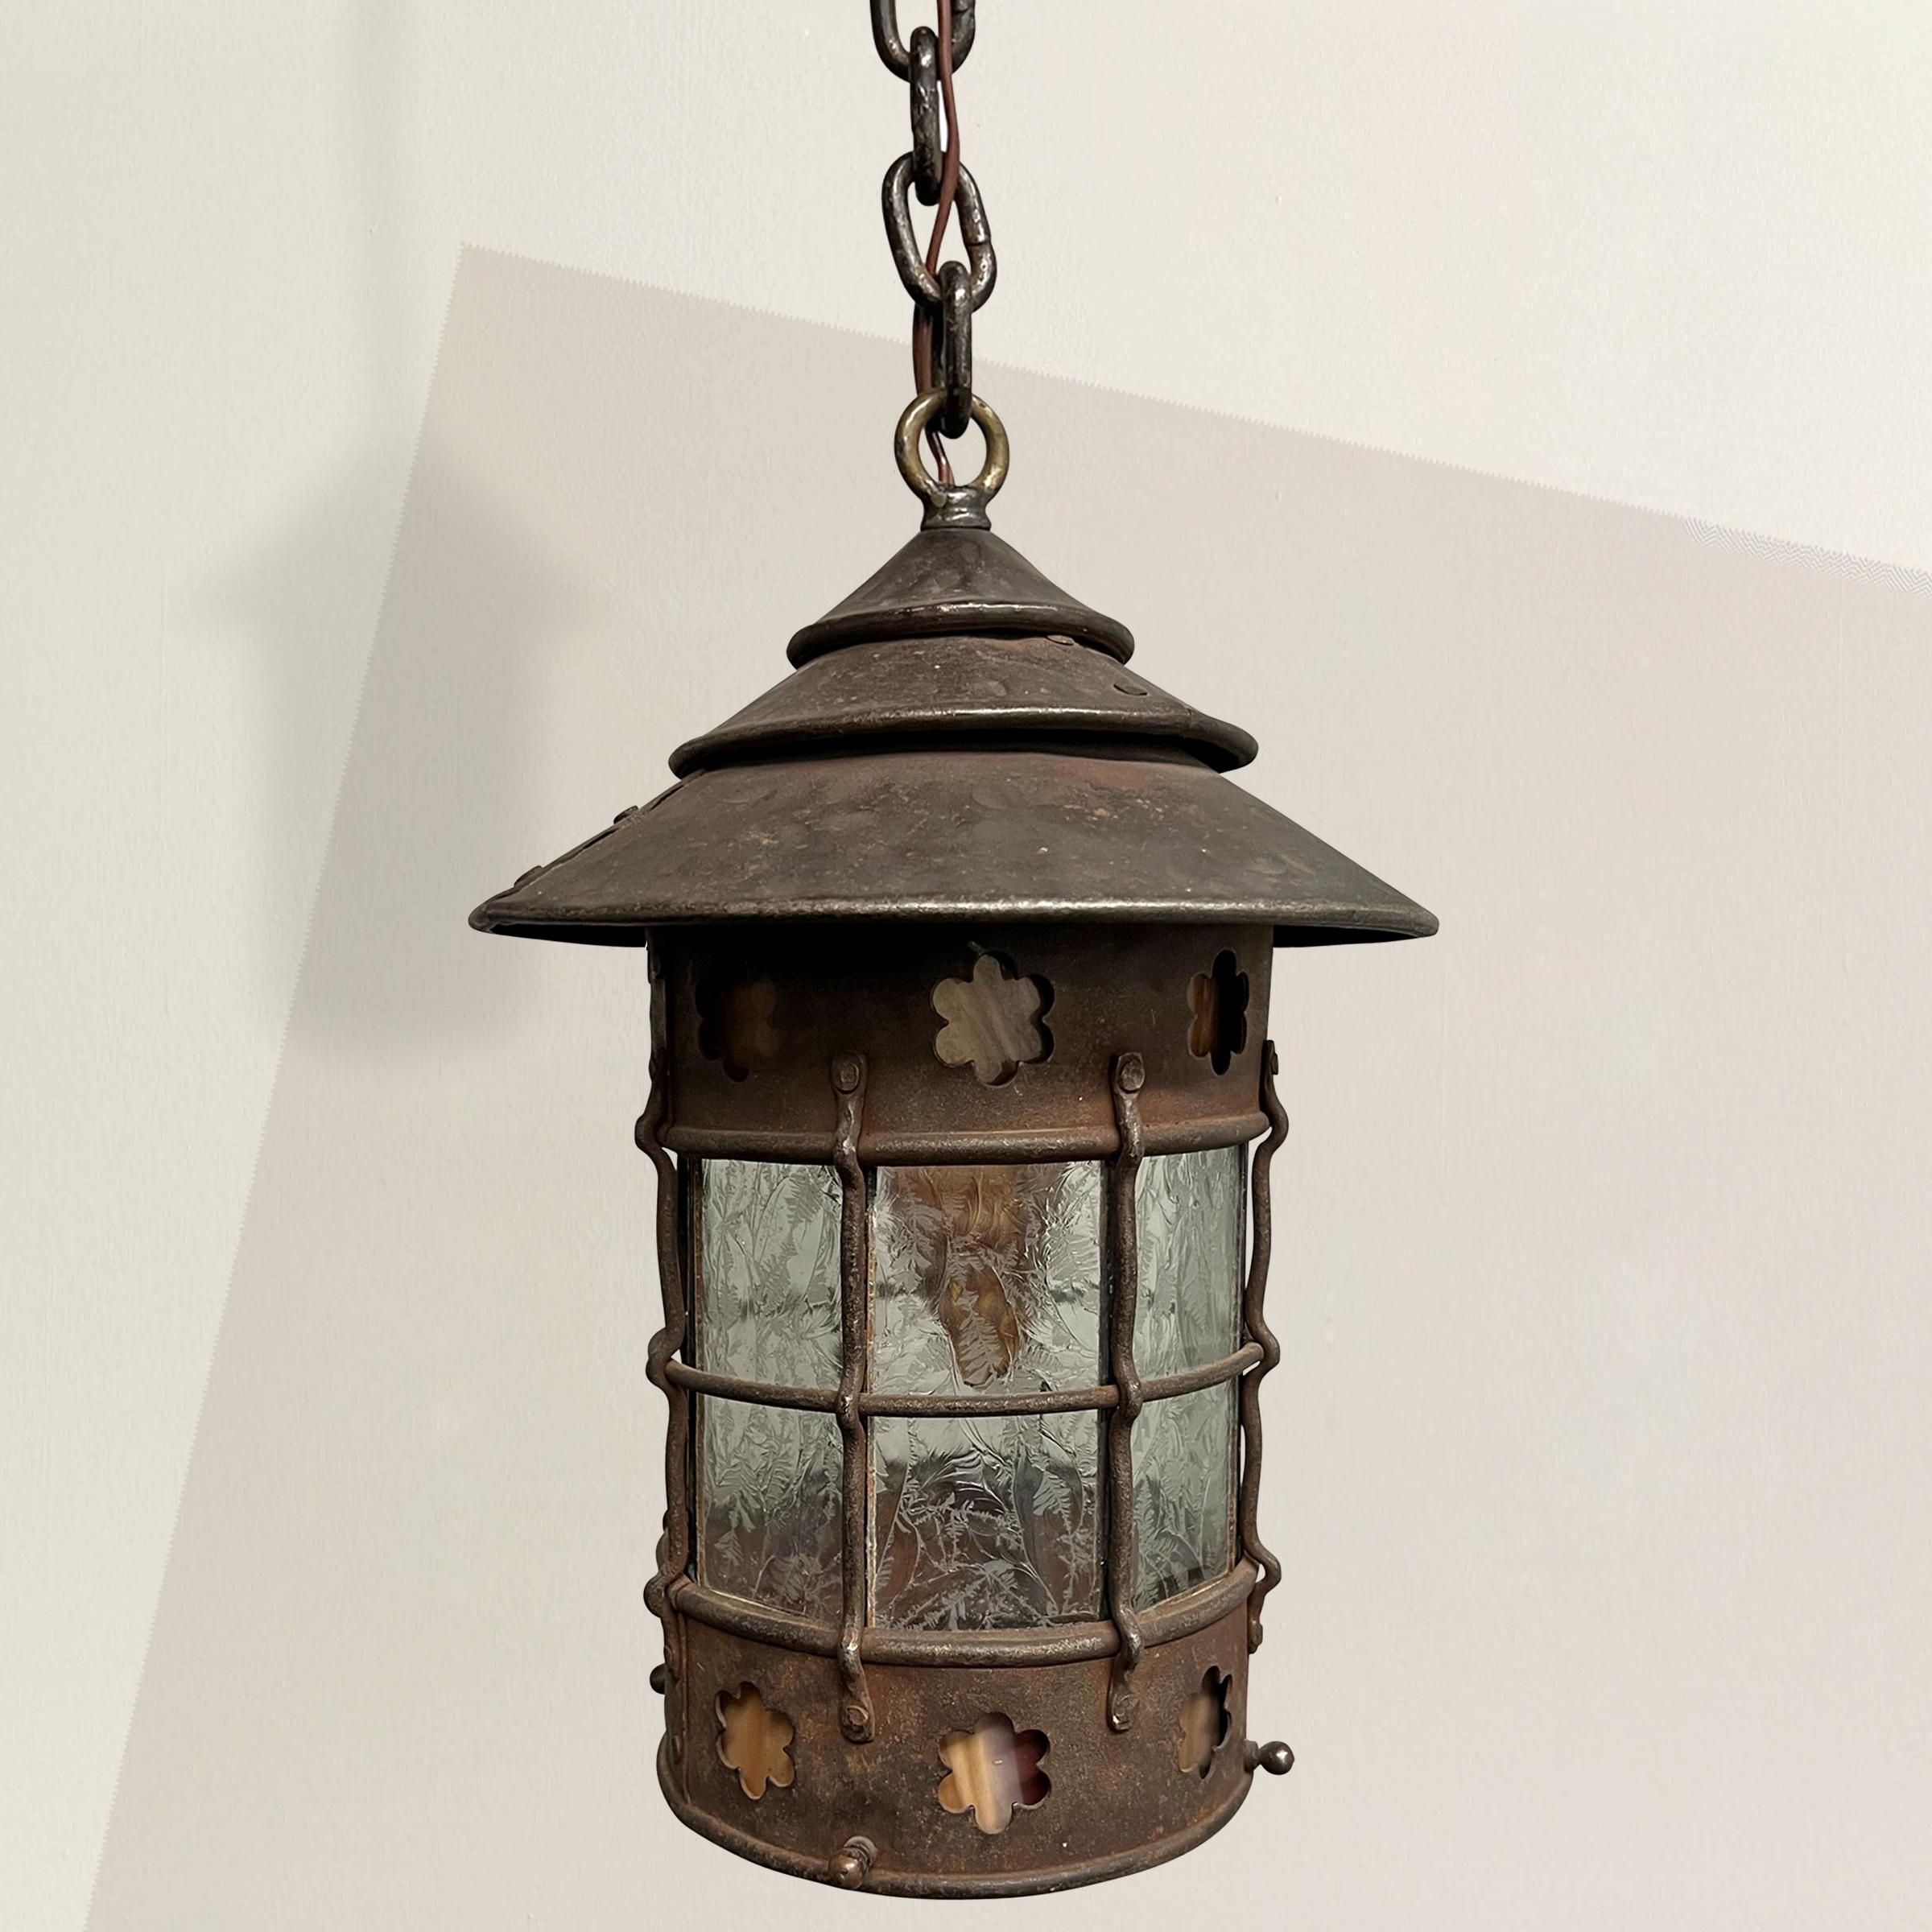 Indulge in the timeless beauty of the early 20th-century American Arts and Crafts movement with this exquisite hand-wrought iron lantern. This exceptional piece showcases the hallmark characteristics of the movement, known for its emphasis on